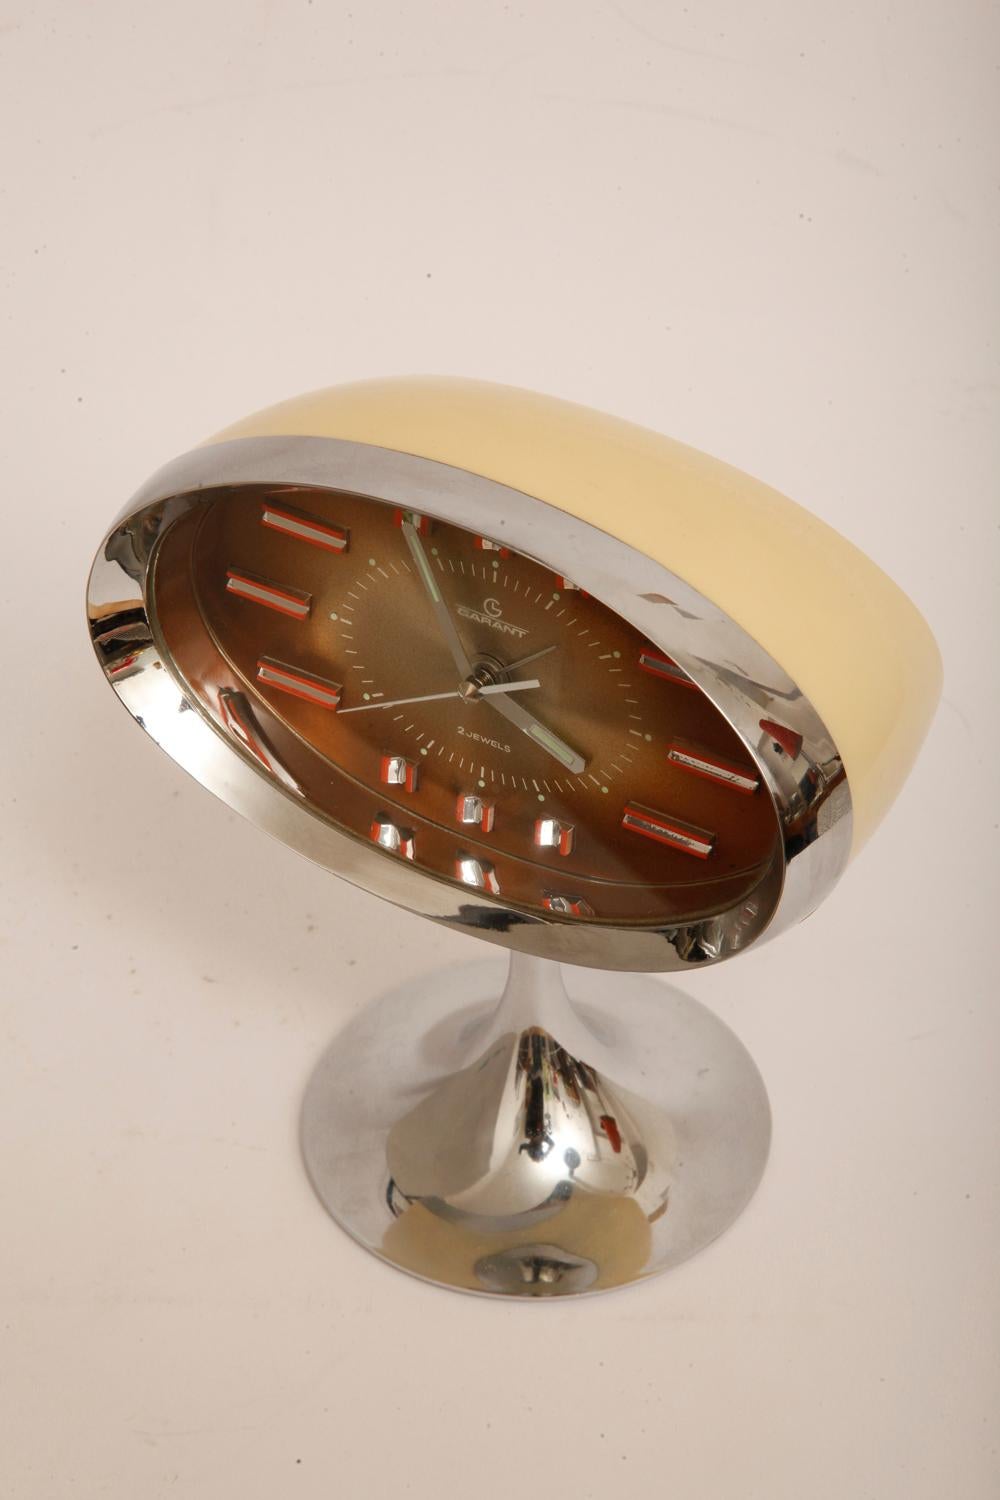 Japanese Space Age Alarm Clock Garant, Plastic and Chromed, 1970s For Sale 10